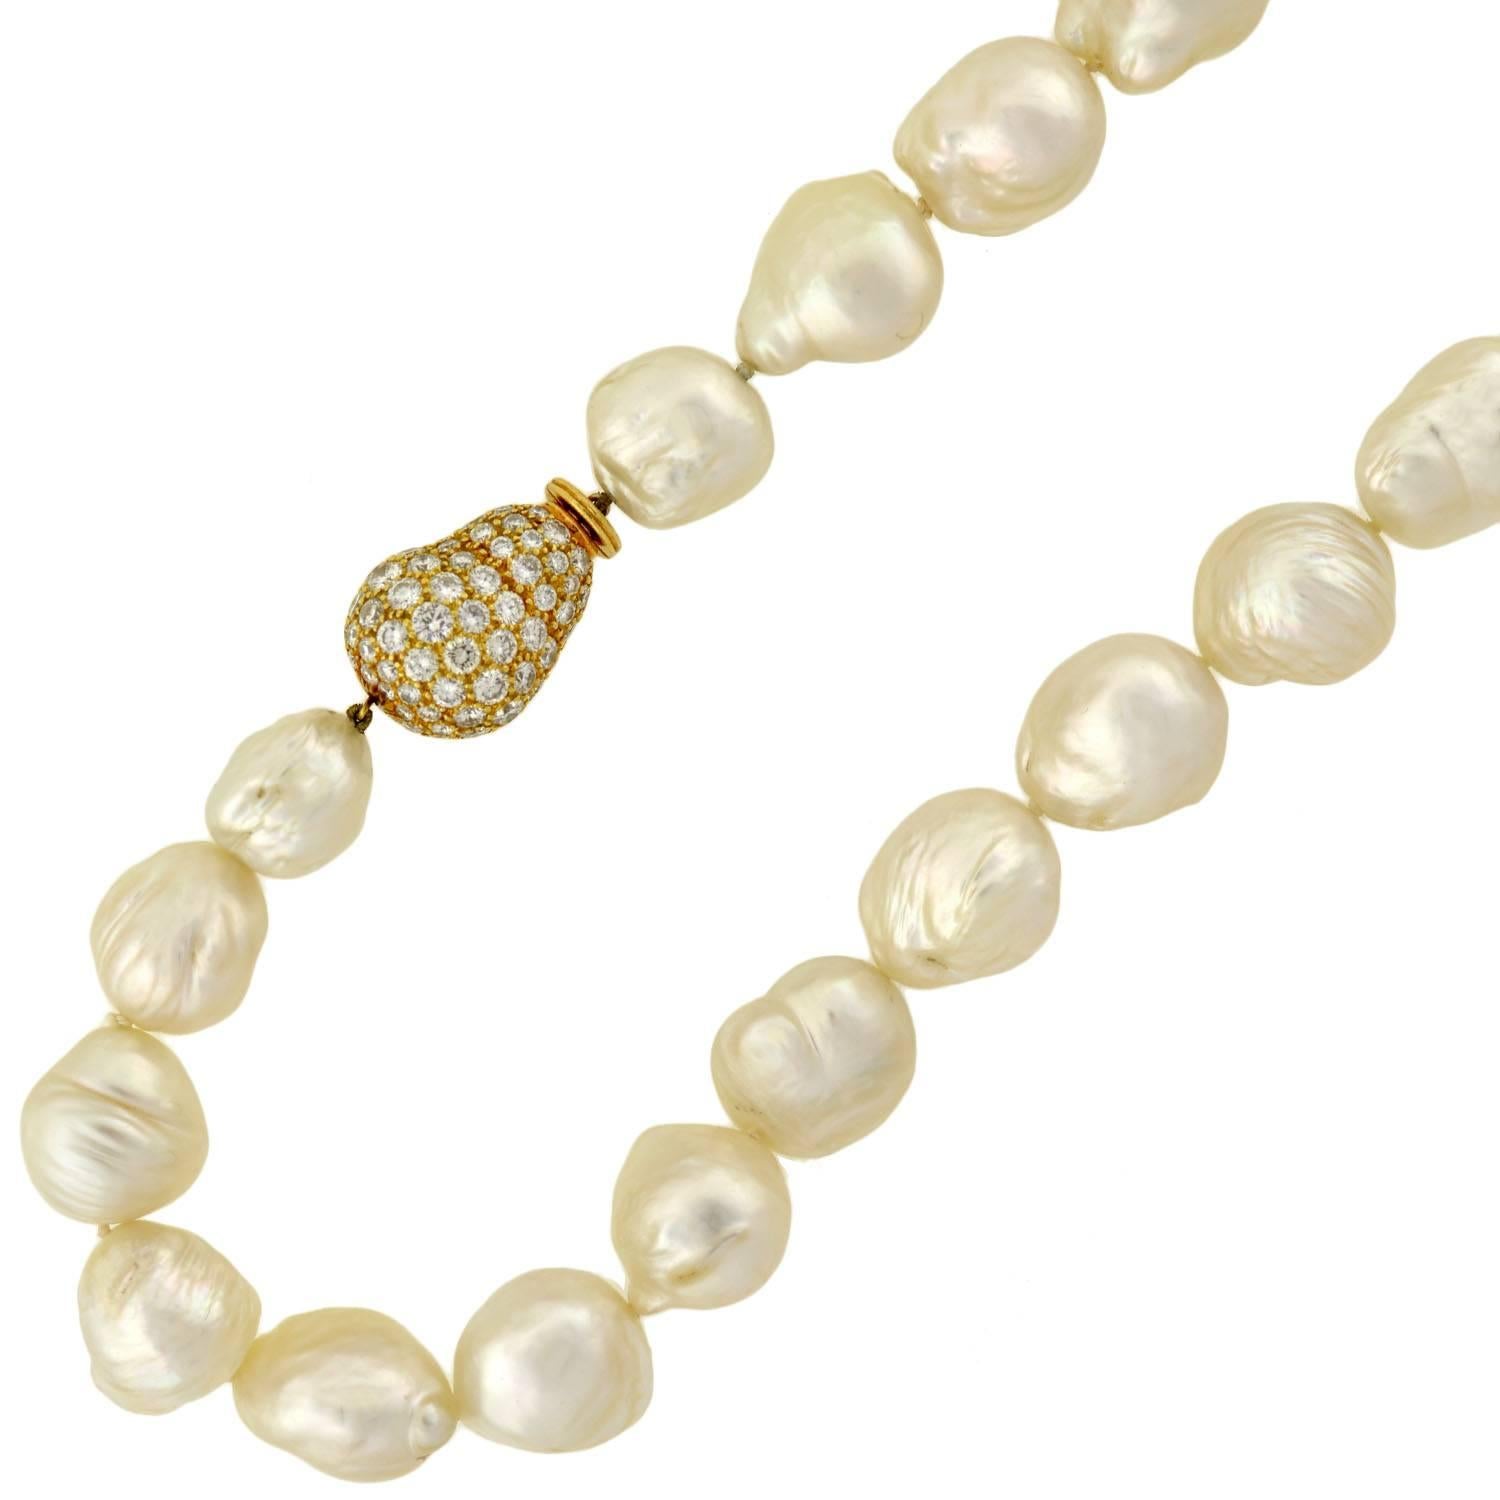 A classically beautiful Estate pearl necklace! This wonderful and feminine piece features a single strand of 27 Baroque pearls, which have an iridescent, creamy white color and wonderful luster. All of the pearls vary in shape and slightly in size